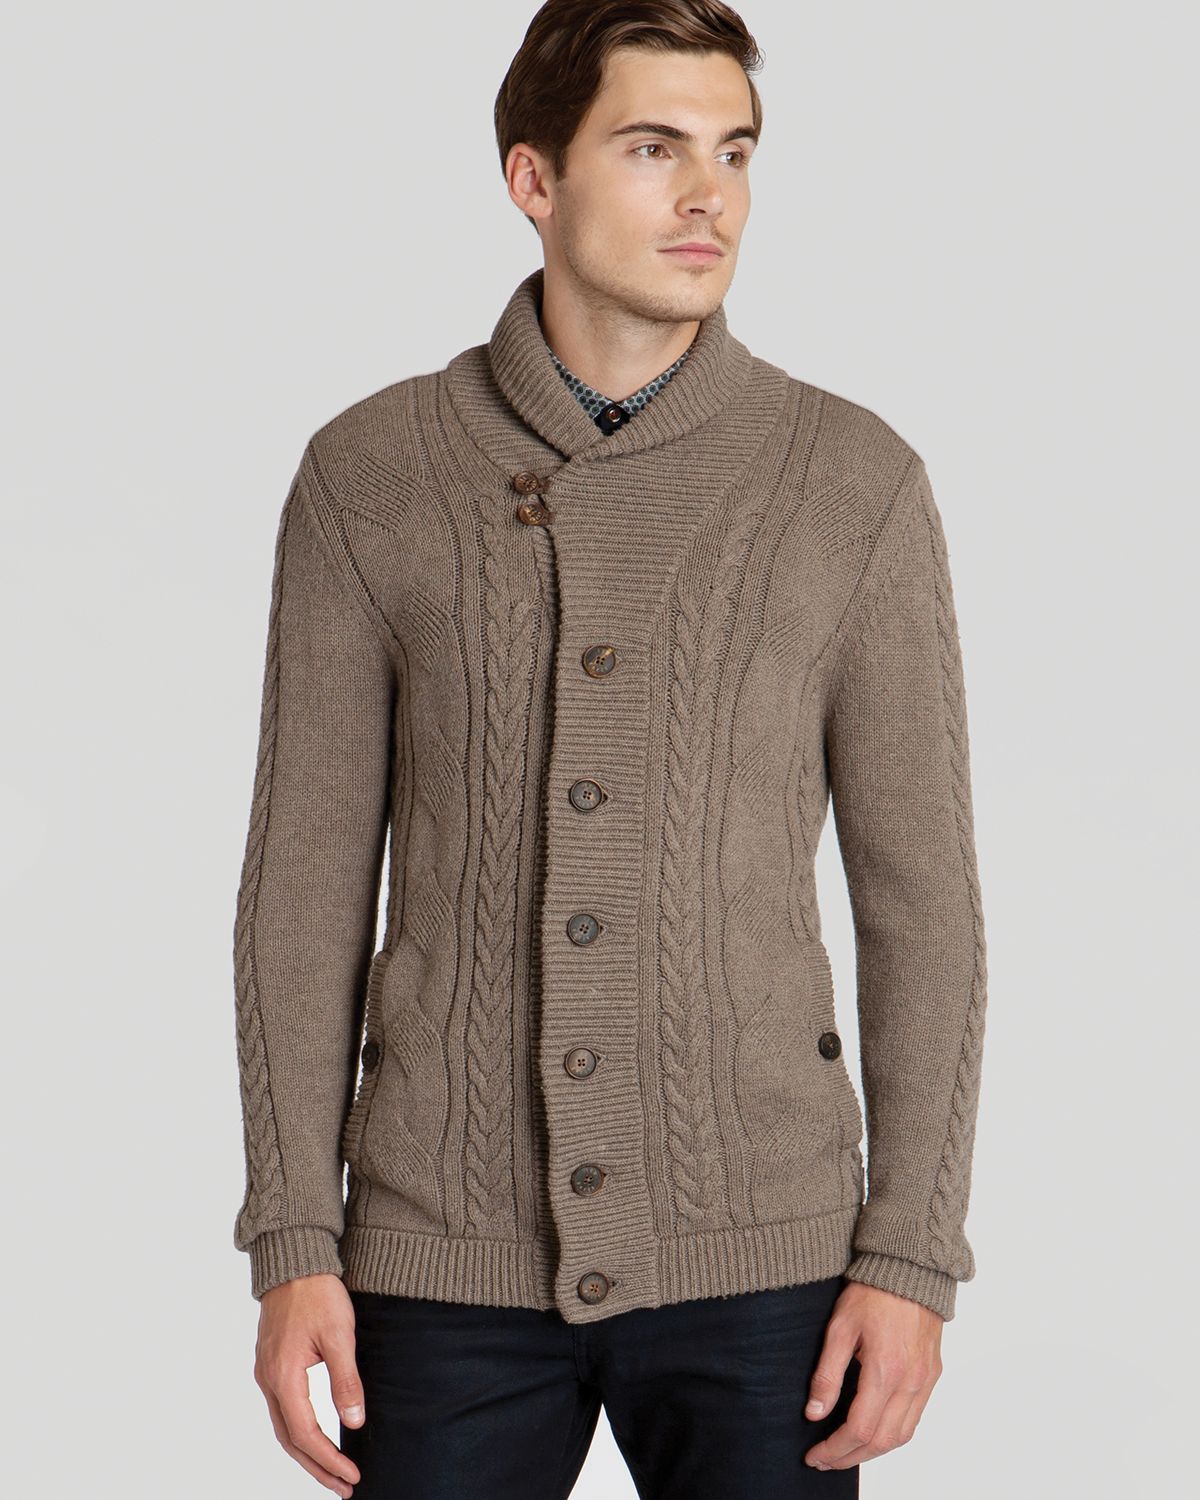 Ted baker Jowalk Cable Knit Cardigan in Brown for Men | Lyst